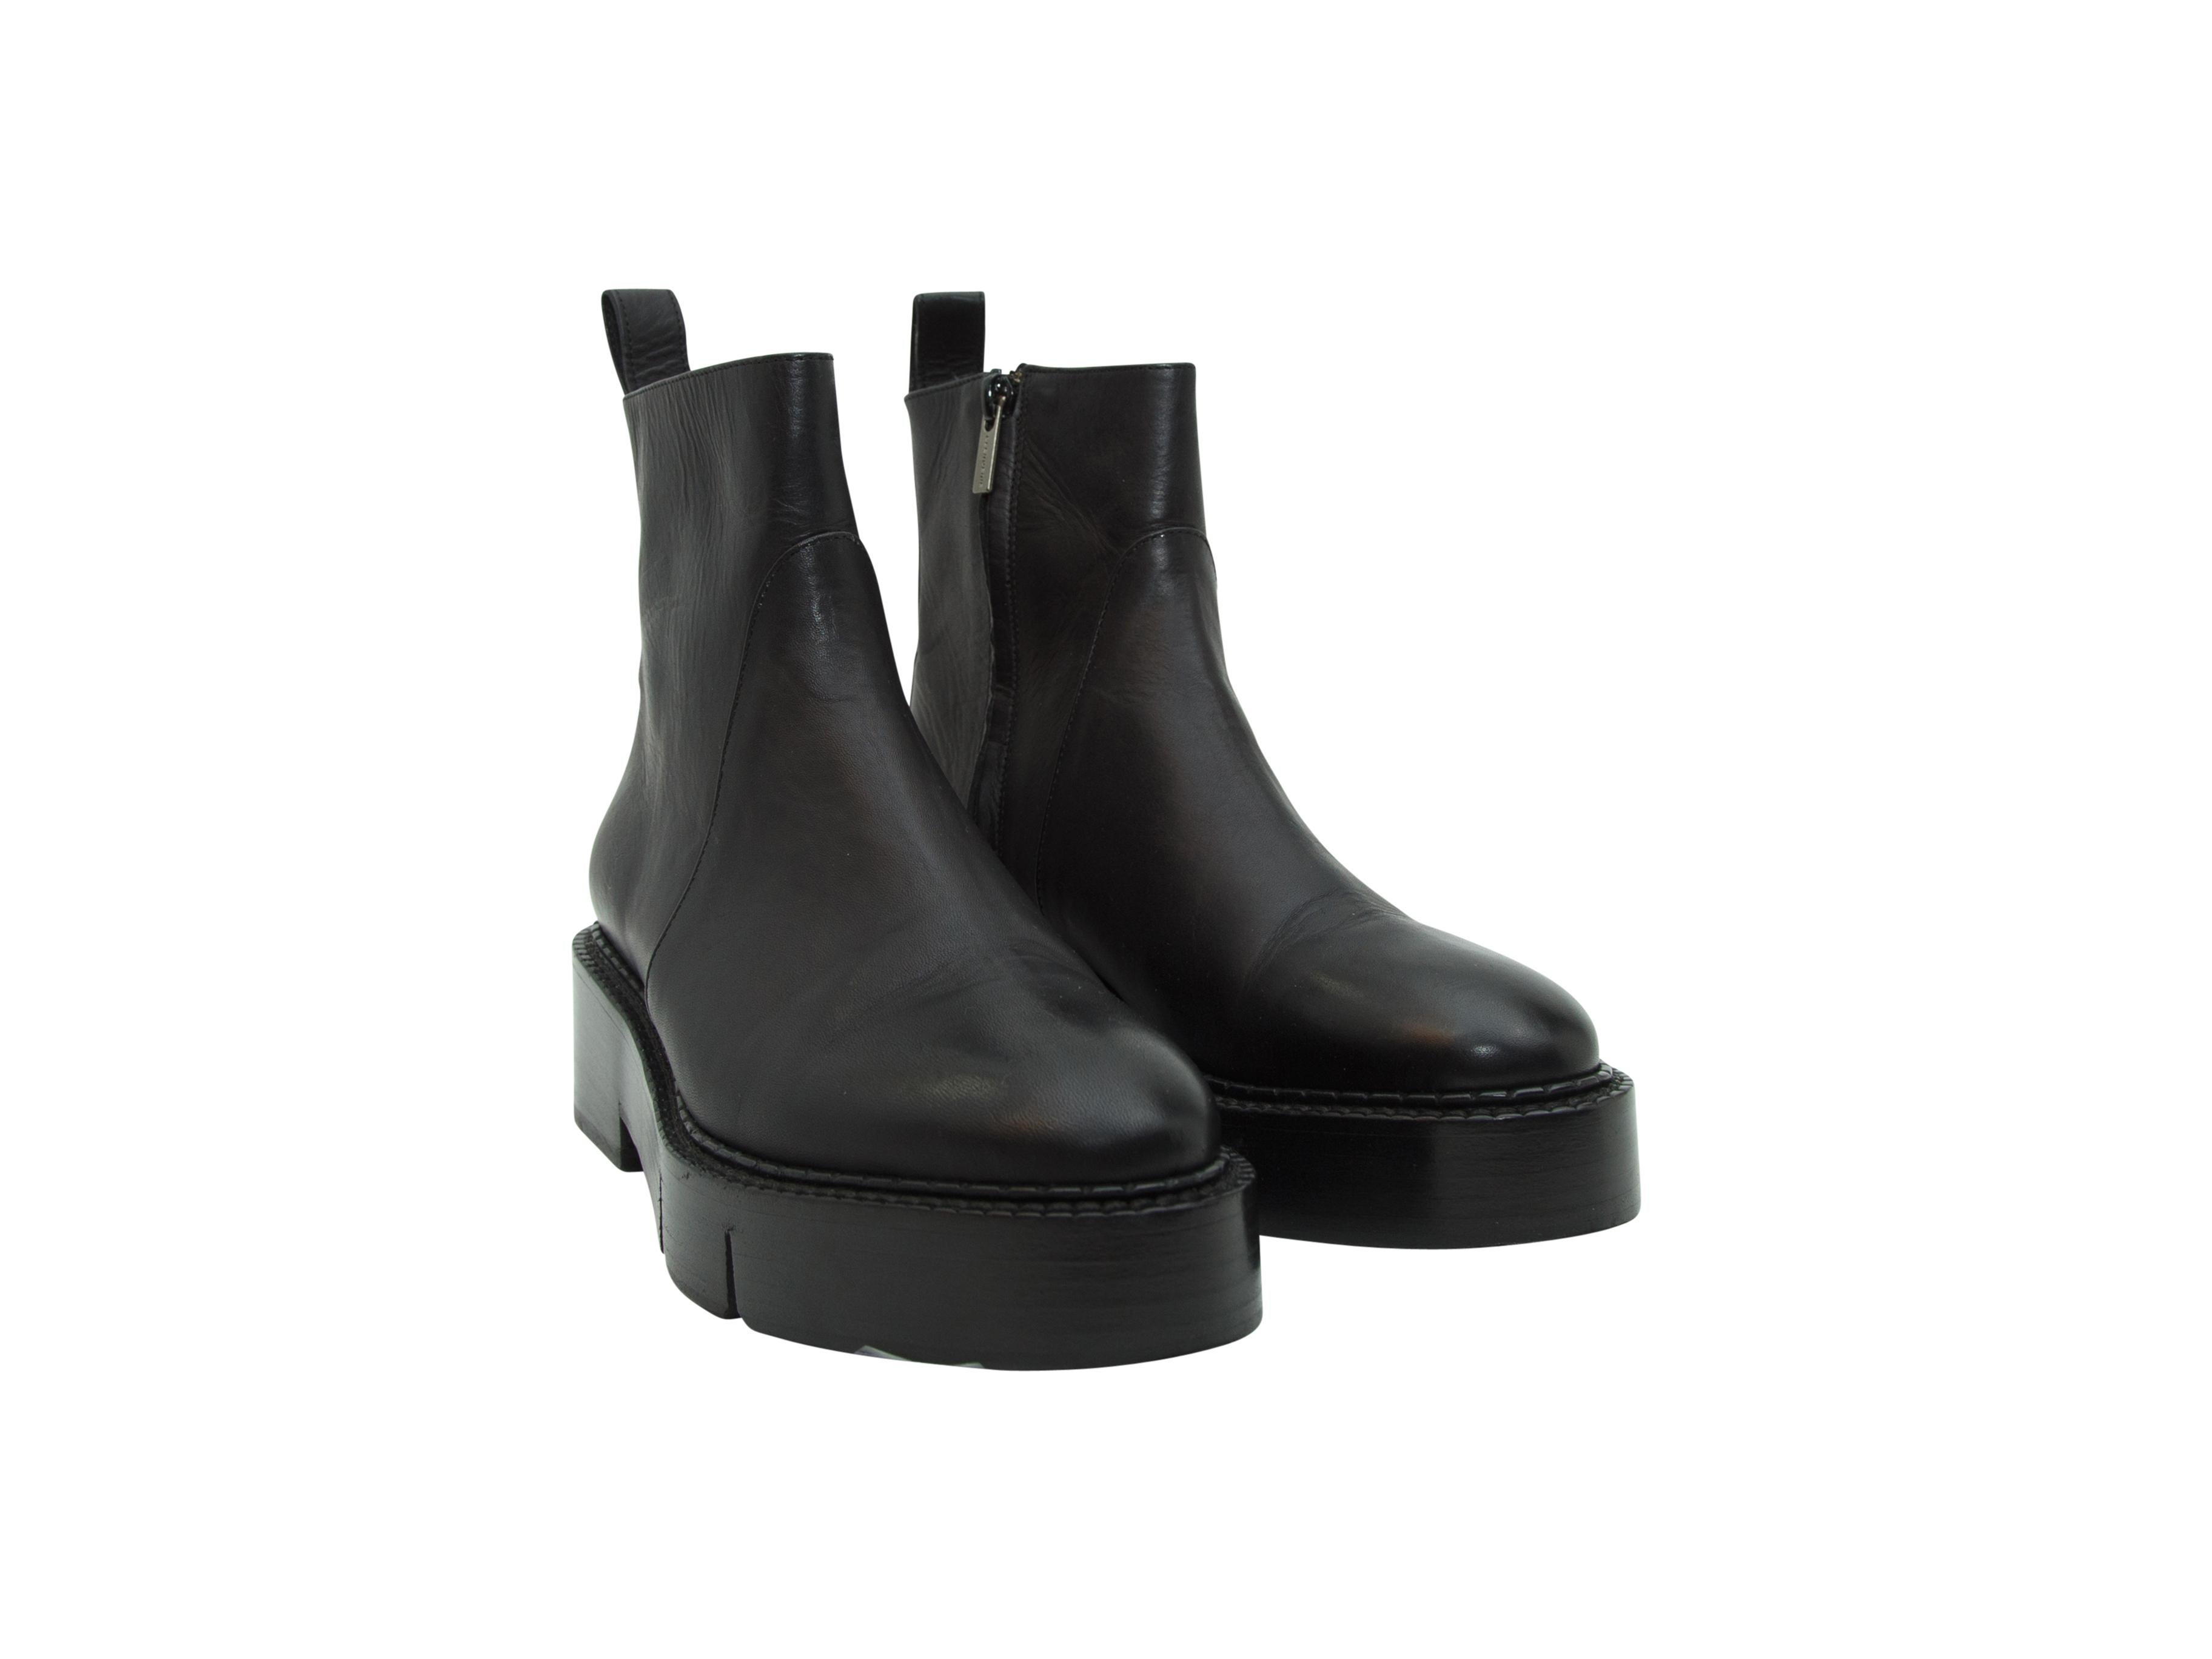 Product details:  Black leather ankle boots by Robert Clergerie.  Inner zip closure.  Round toe.  Stacked heel.  2